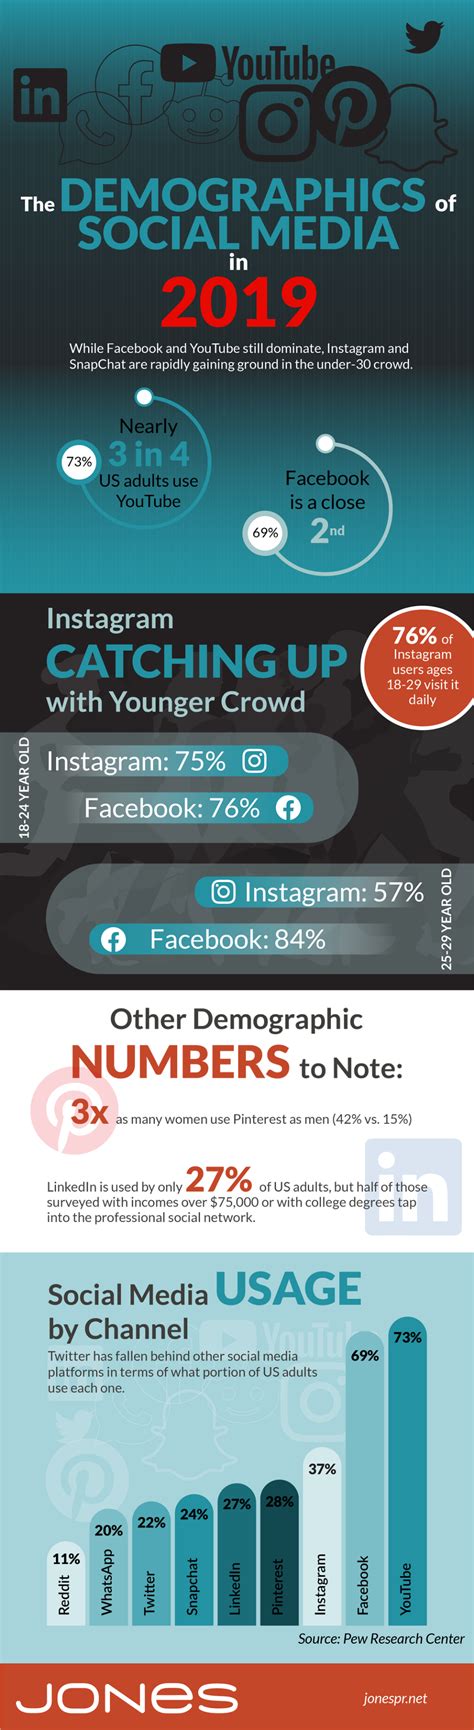 The Demographics Of Social Media In 2019 Infographic Social Media